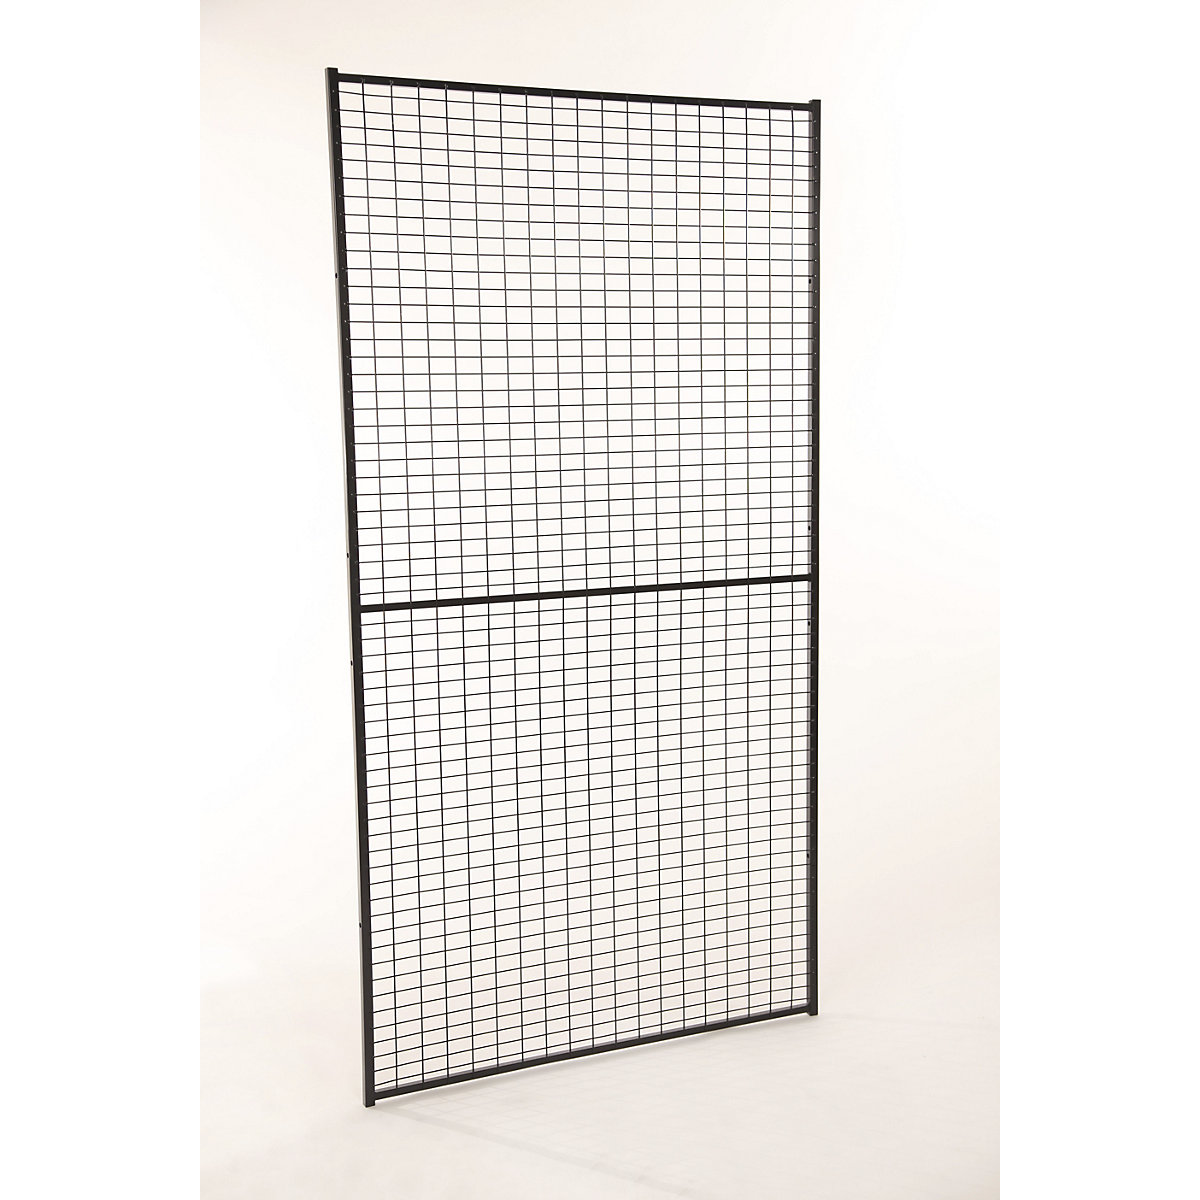 X-GUARD LITE machine protective fencing, wall section – Axelent, height 1900 mm, width 900 mm-10